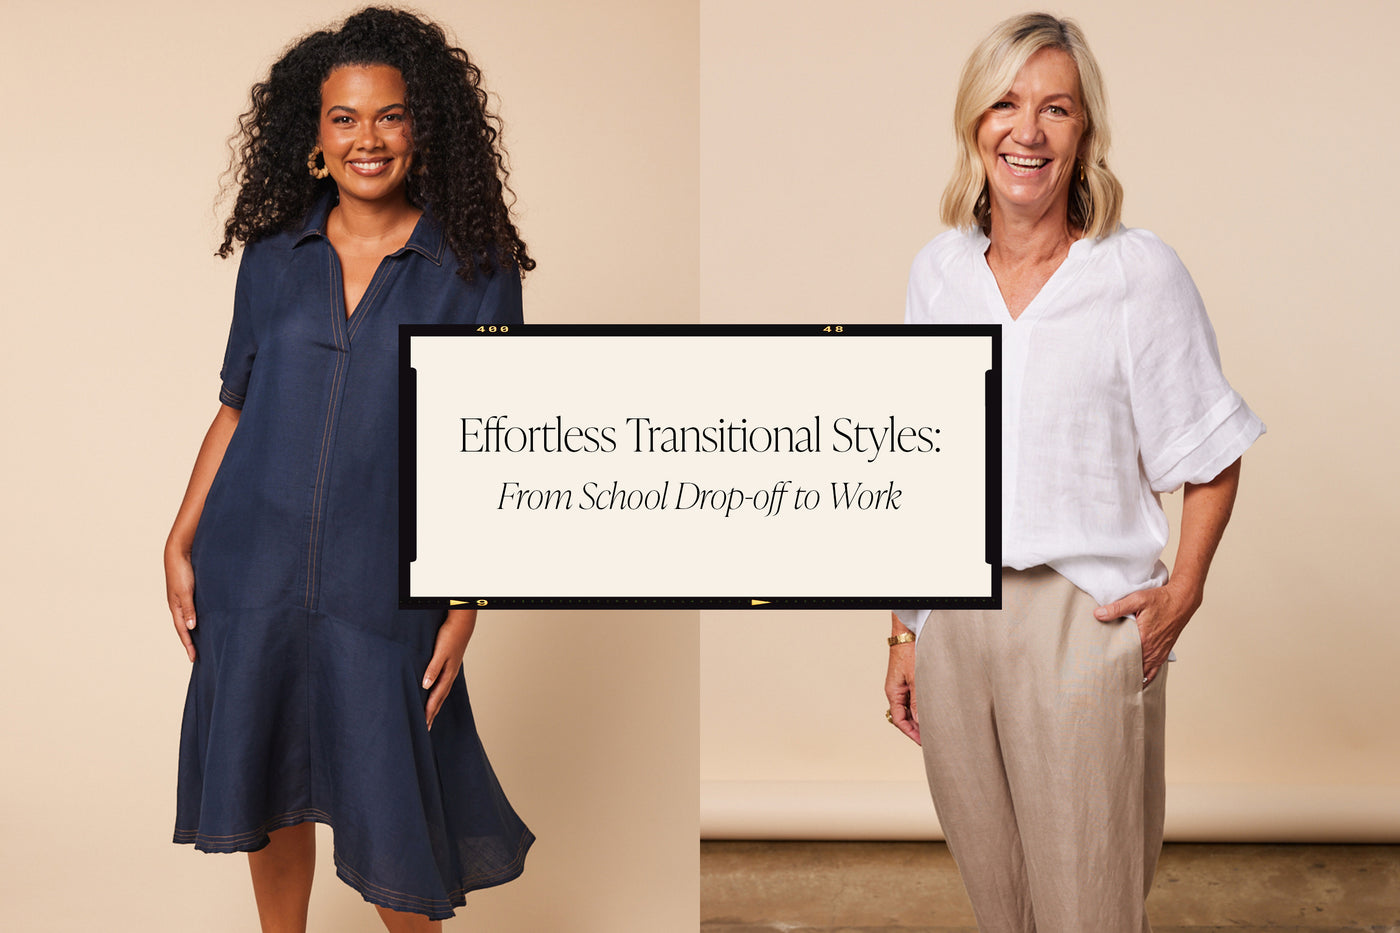 Effortless Transitional Styles: From School Drop-off to Work